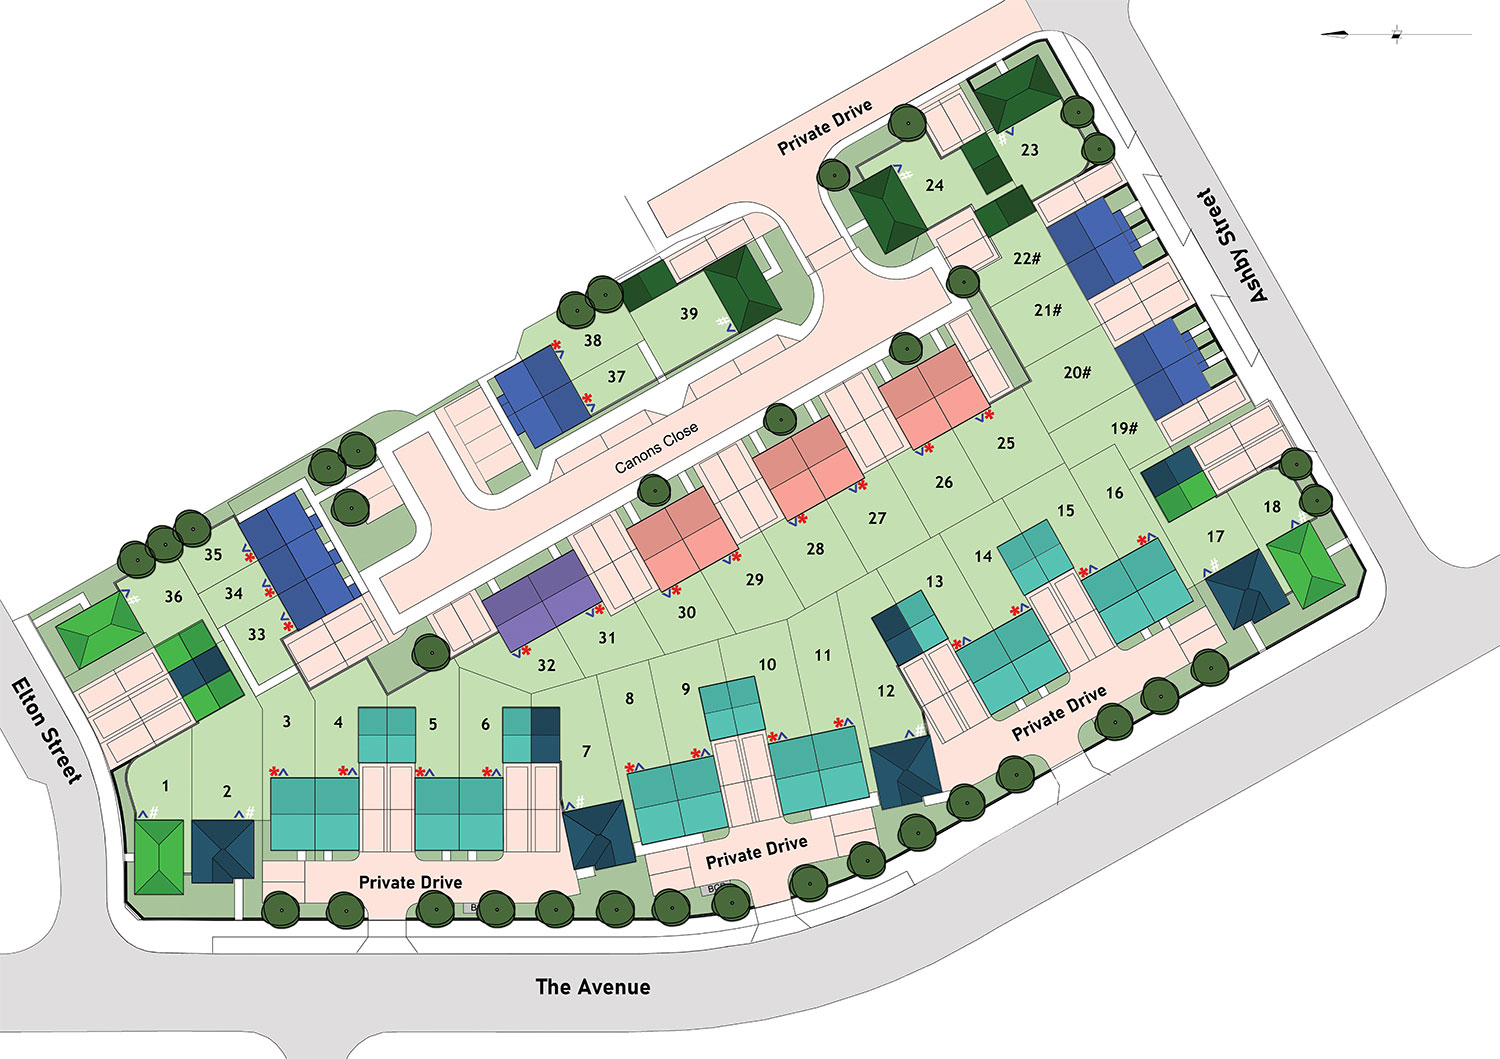 Heartlands at Priors Hall Park Interactive Site Plan